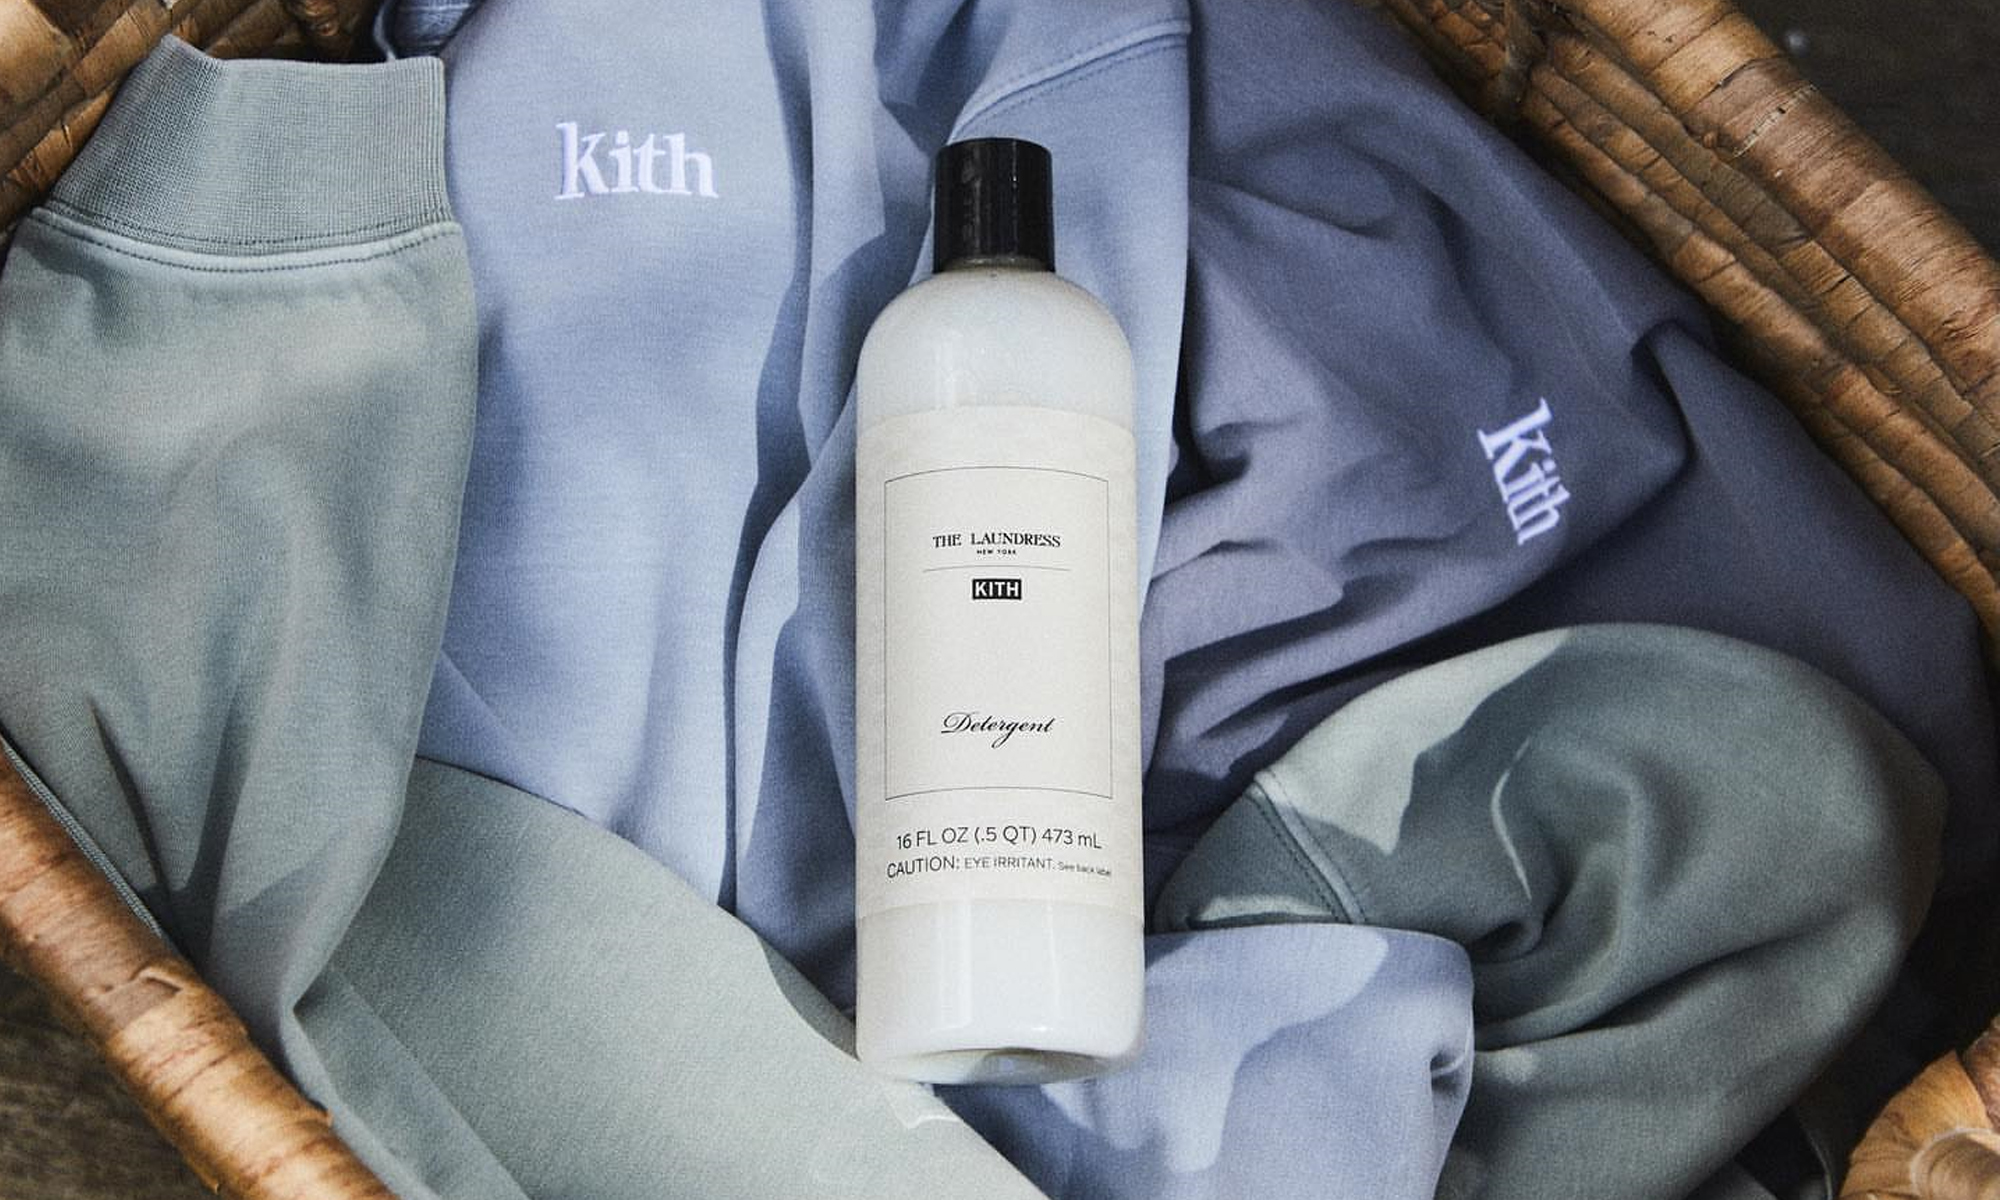 KITH for THE LAUNDRESS 合作单品发布